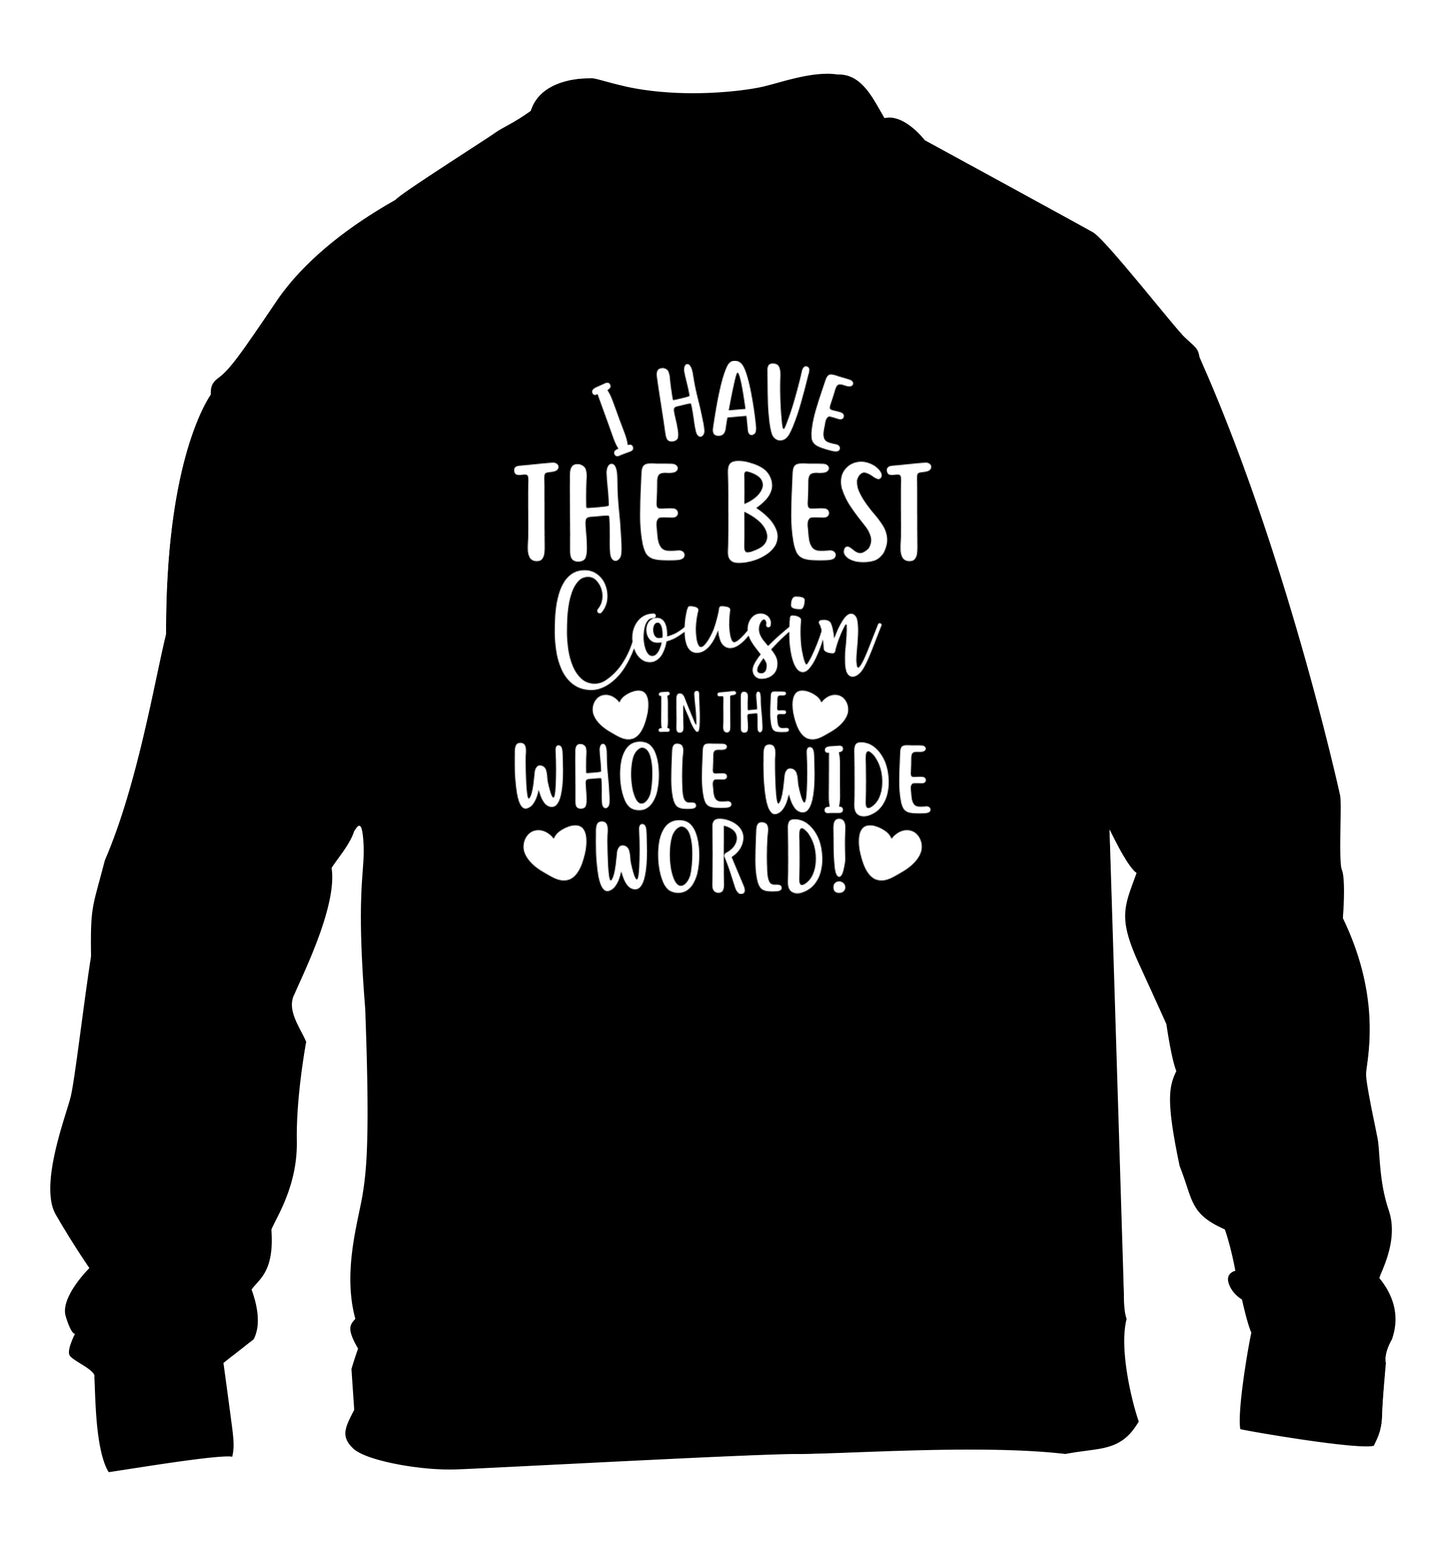 I have the best cousin in the whole wide world! children's black sweater 12-13 Years